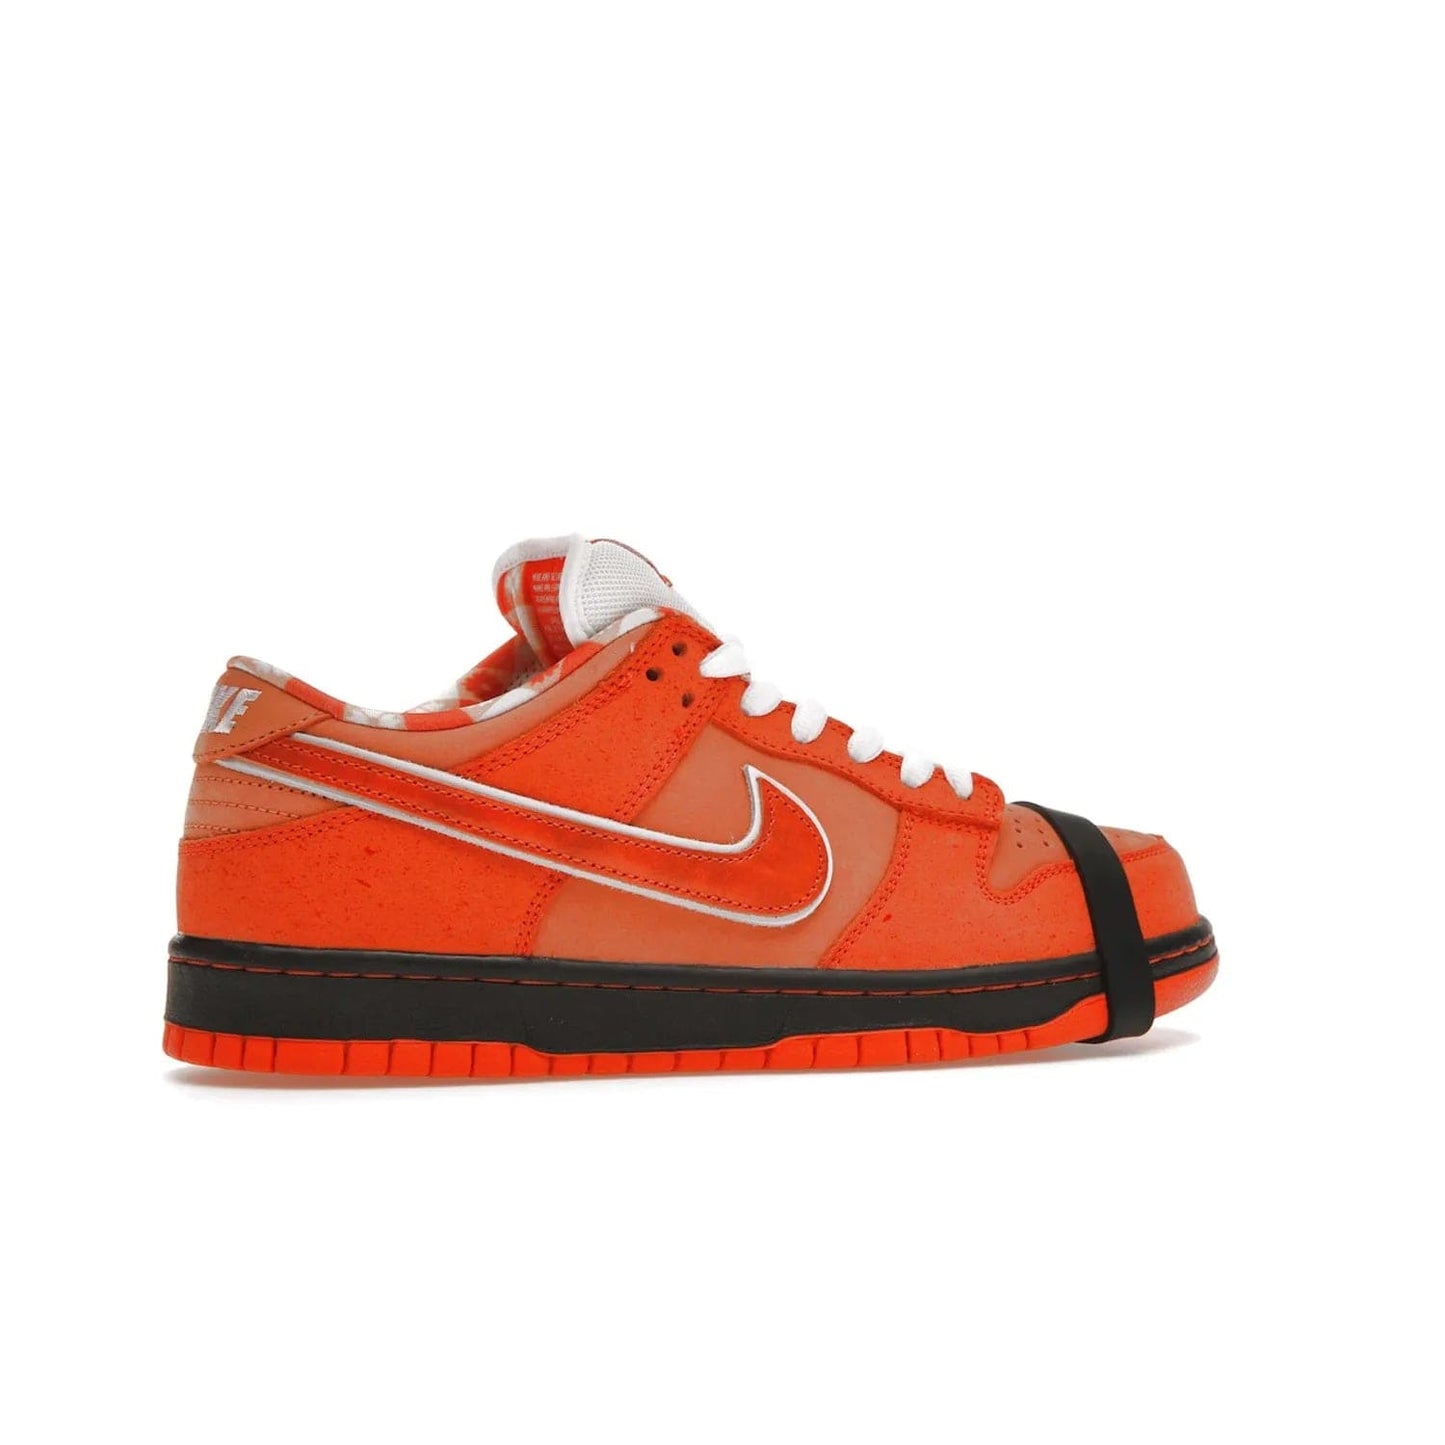 Nike SB Dunk Low Concepts Orange Lobster - Image 35 - Only at www.BallersClubKickz.com - Limited Nike SB Dunk Low Concepts Orange Lobster features premium nubuck upper with vibrant oranges for eye-catching colorblocked design. Signature Nike SB tag and bib-inspired interior for added texture. Outsole and cupsole provide extra reinforcement. Get it 12/20/2022.